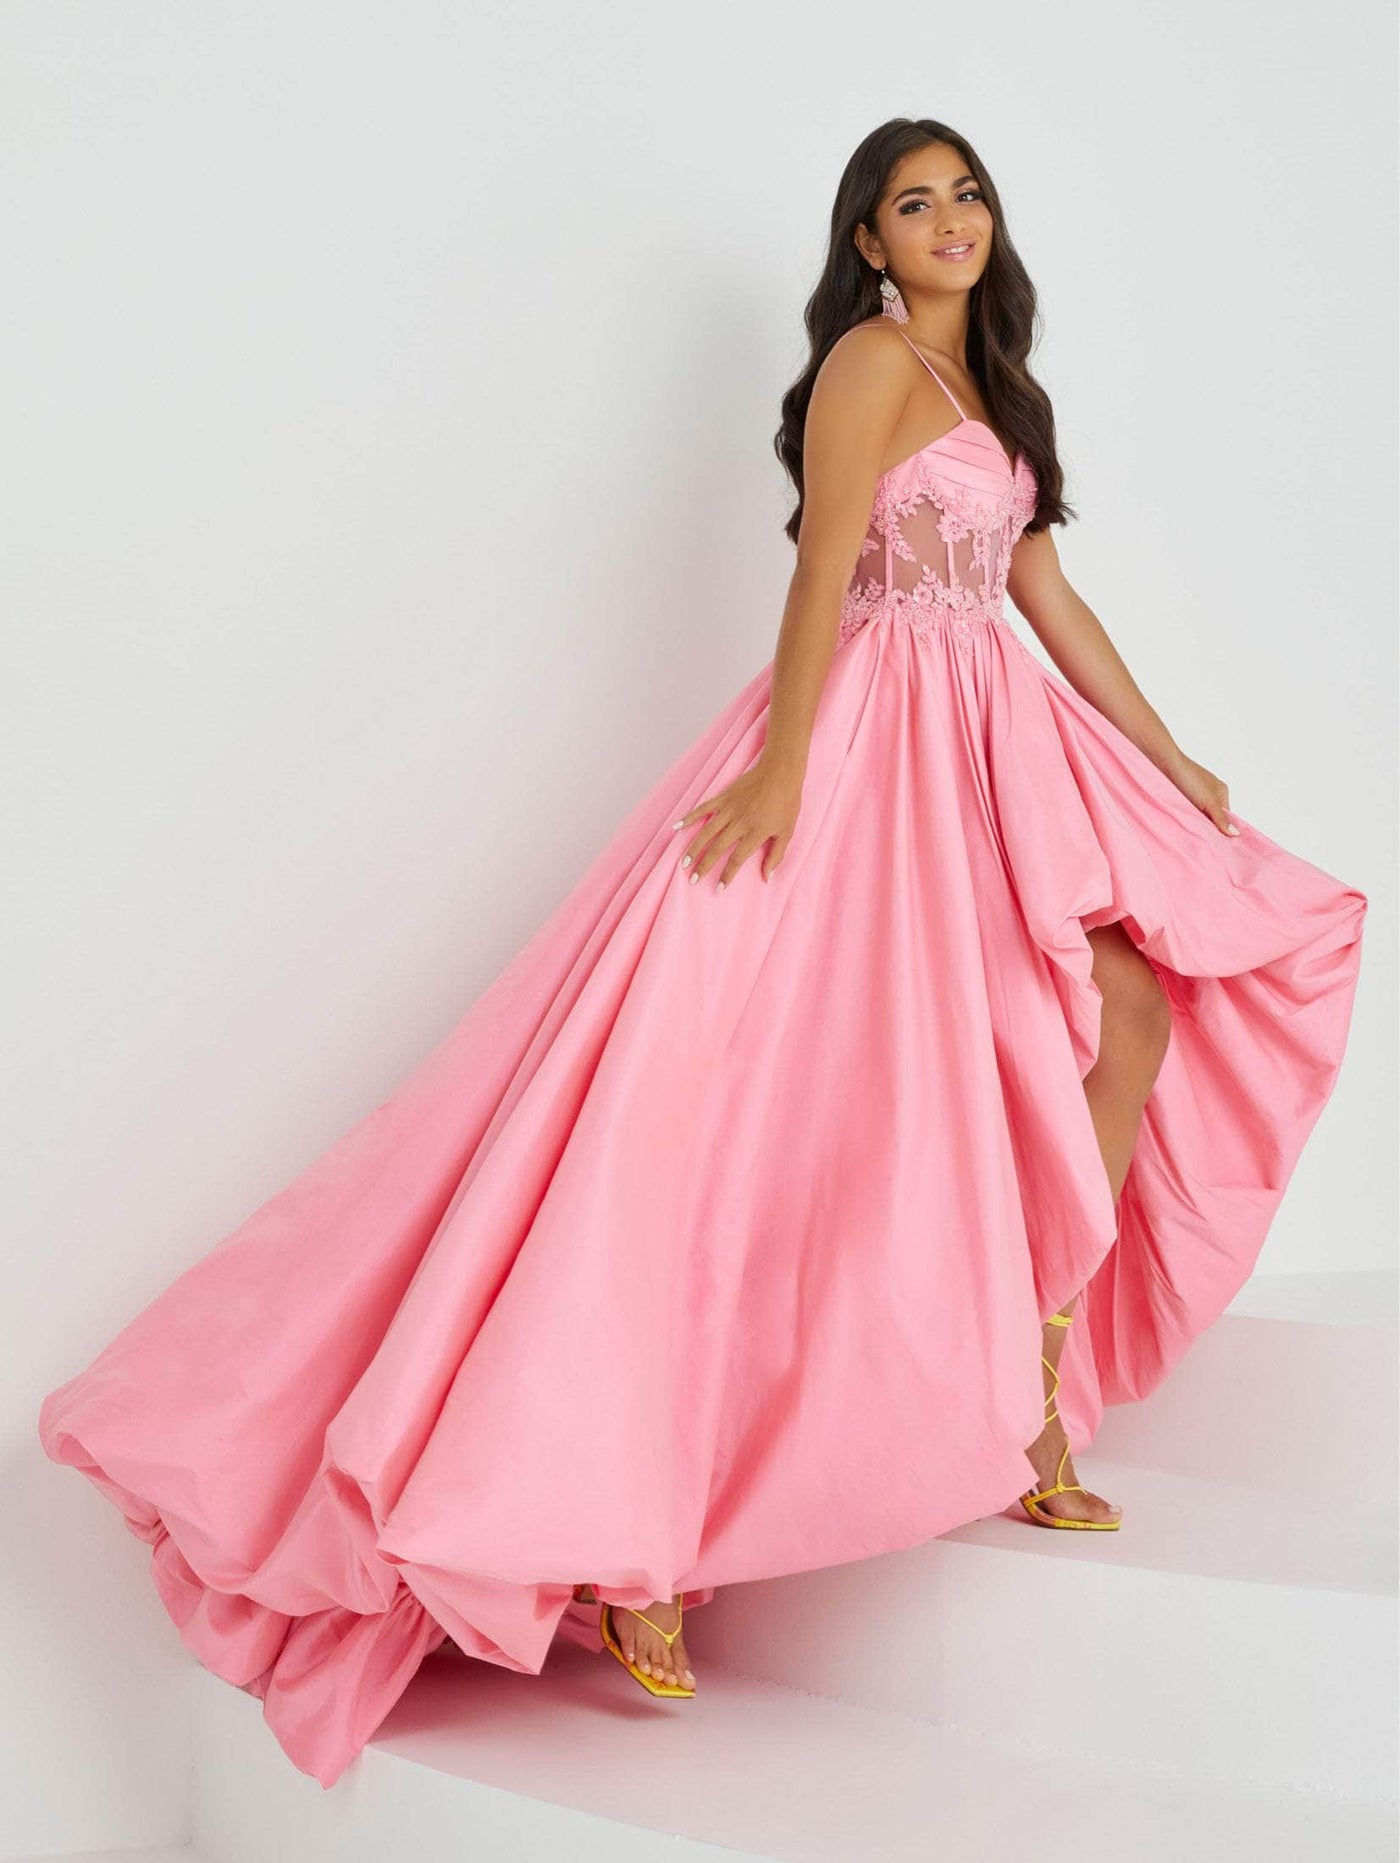 Tiffany Designs by Christina Wu 16020 - Bubble Skirt Prom Gown Special Occasion Dress